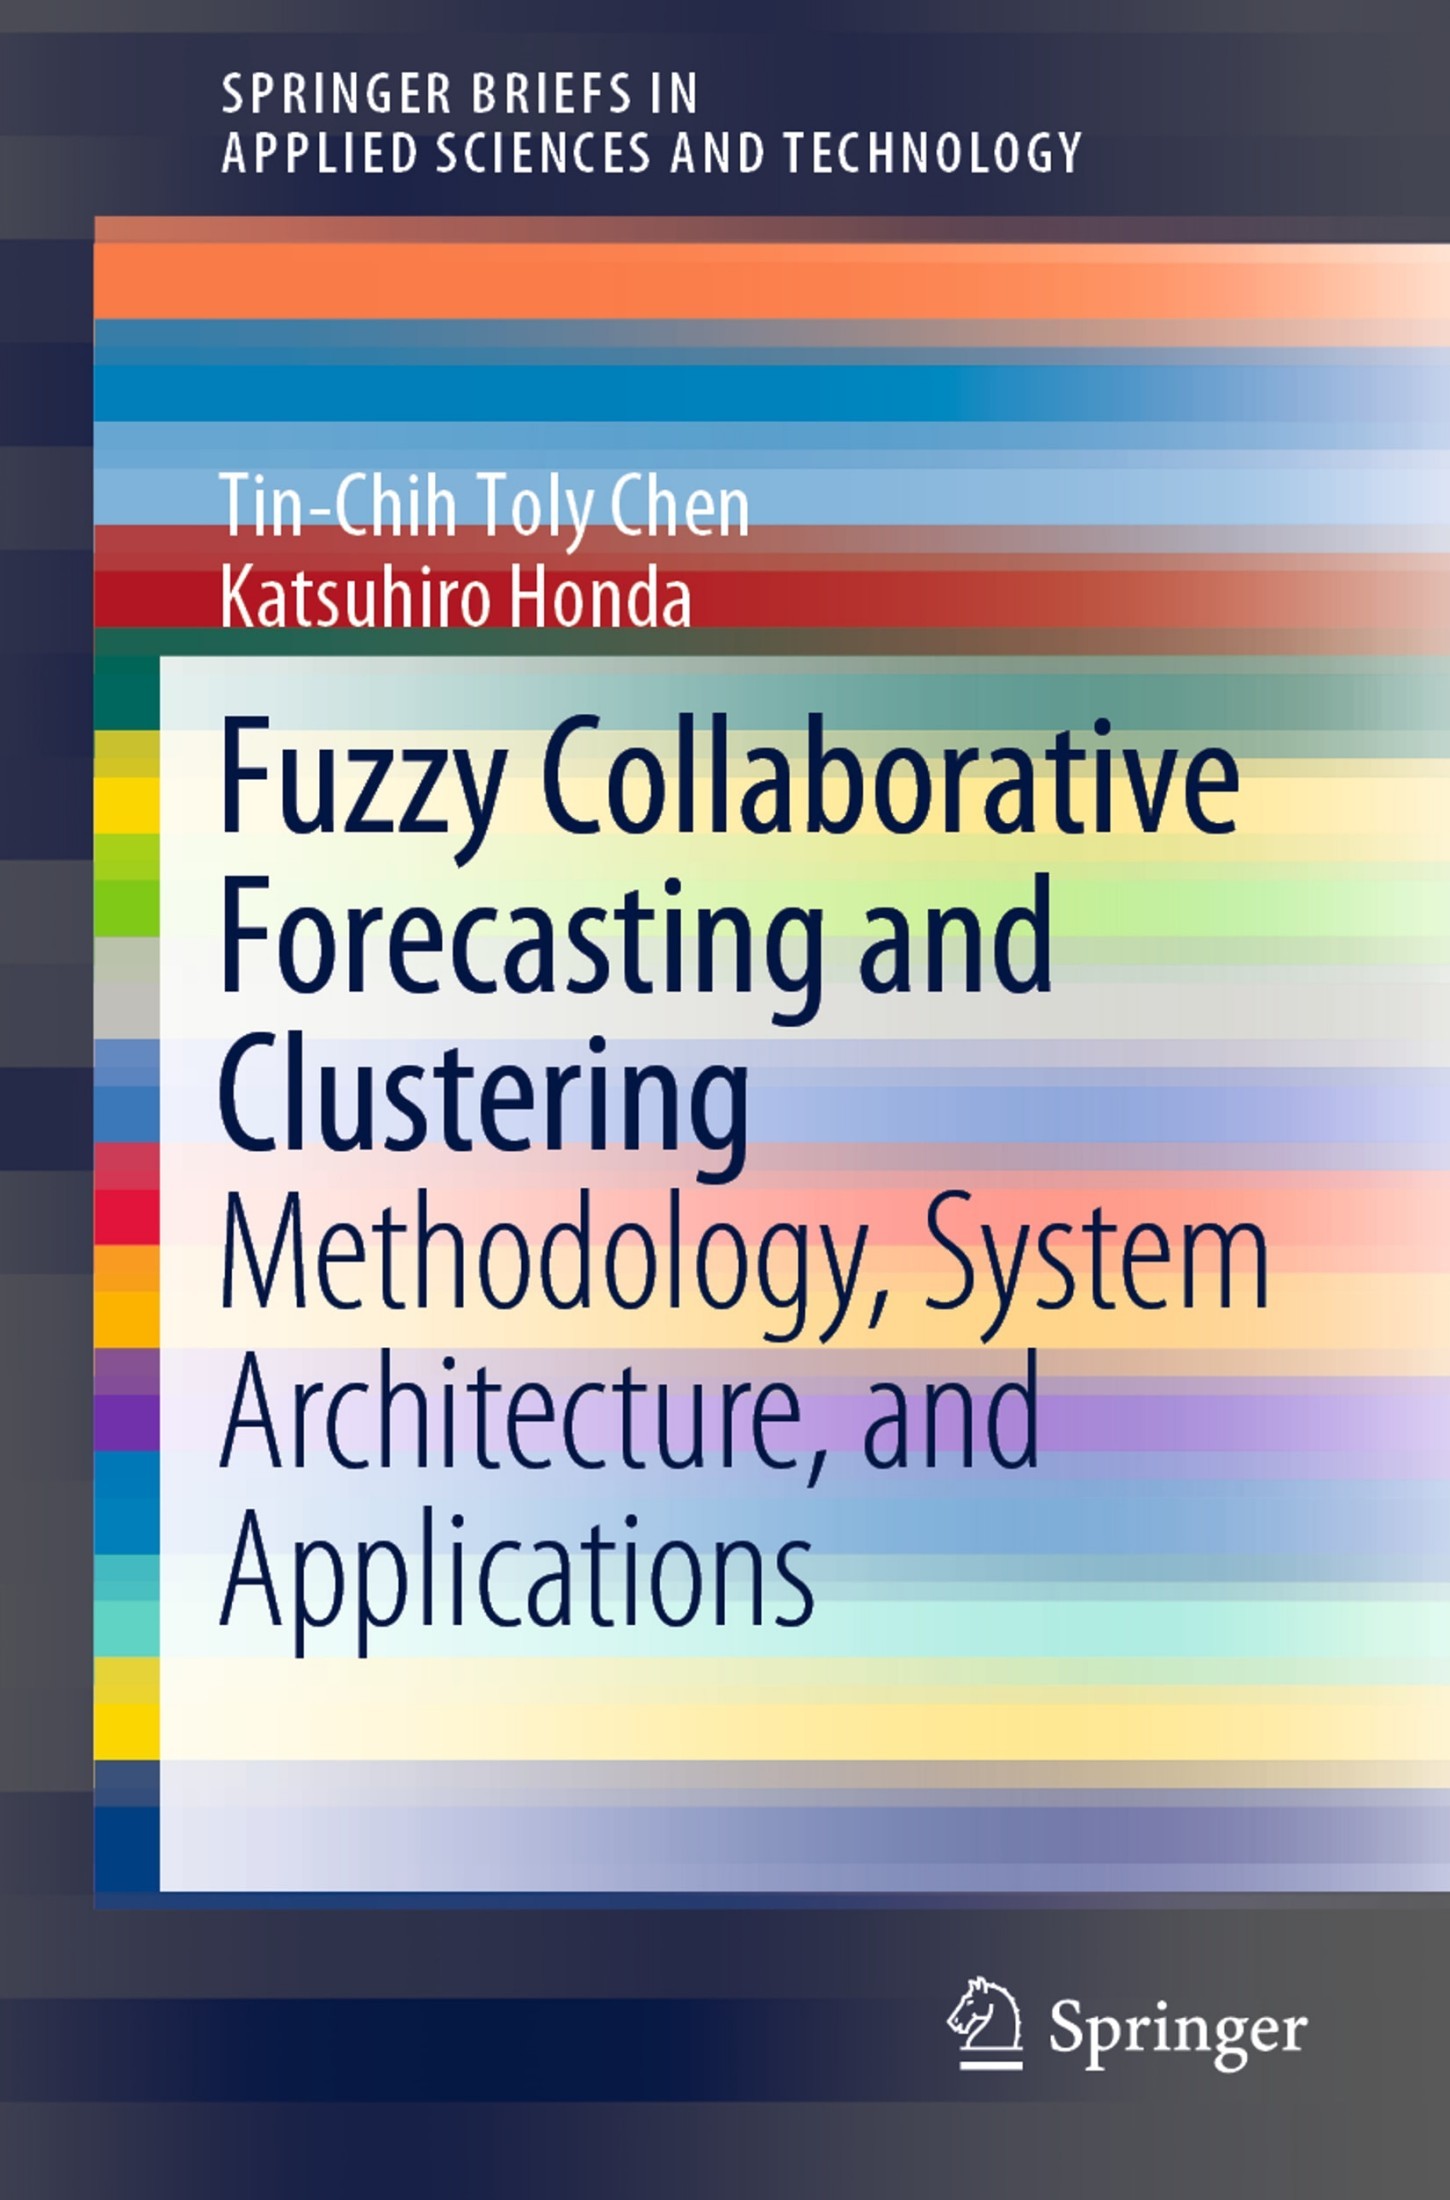 Fuzzy Collaborative Forecasting and Clustering